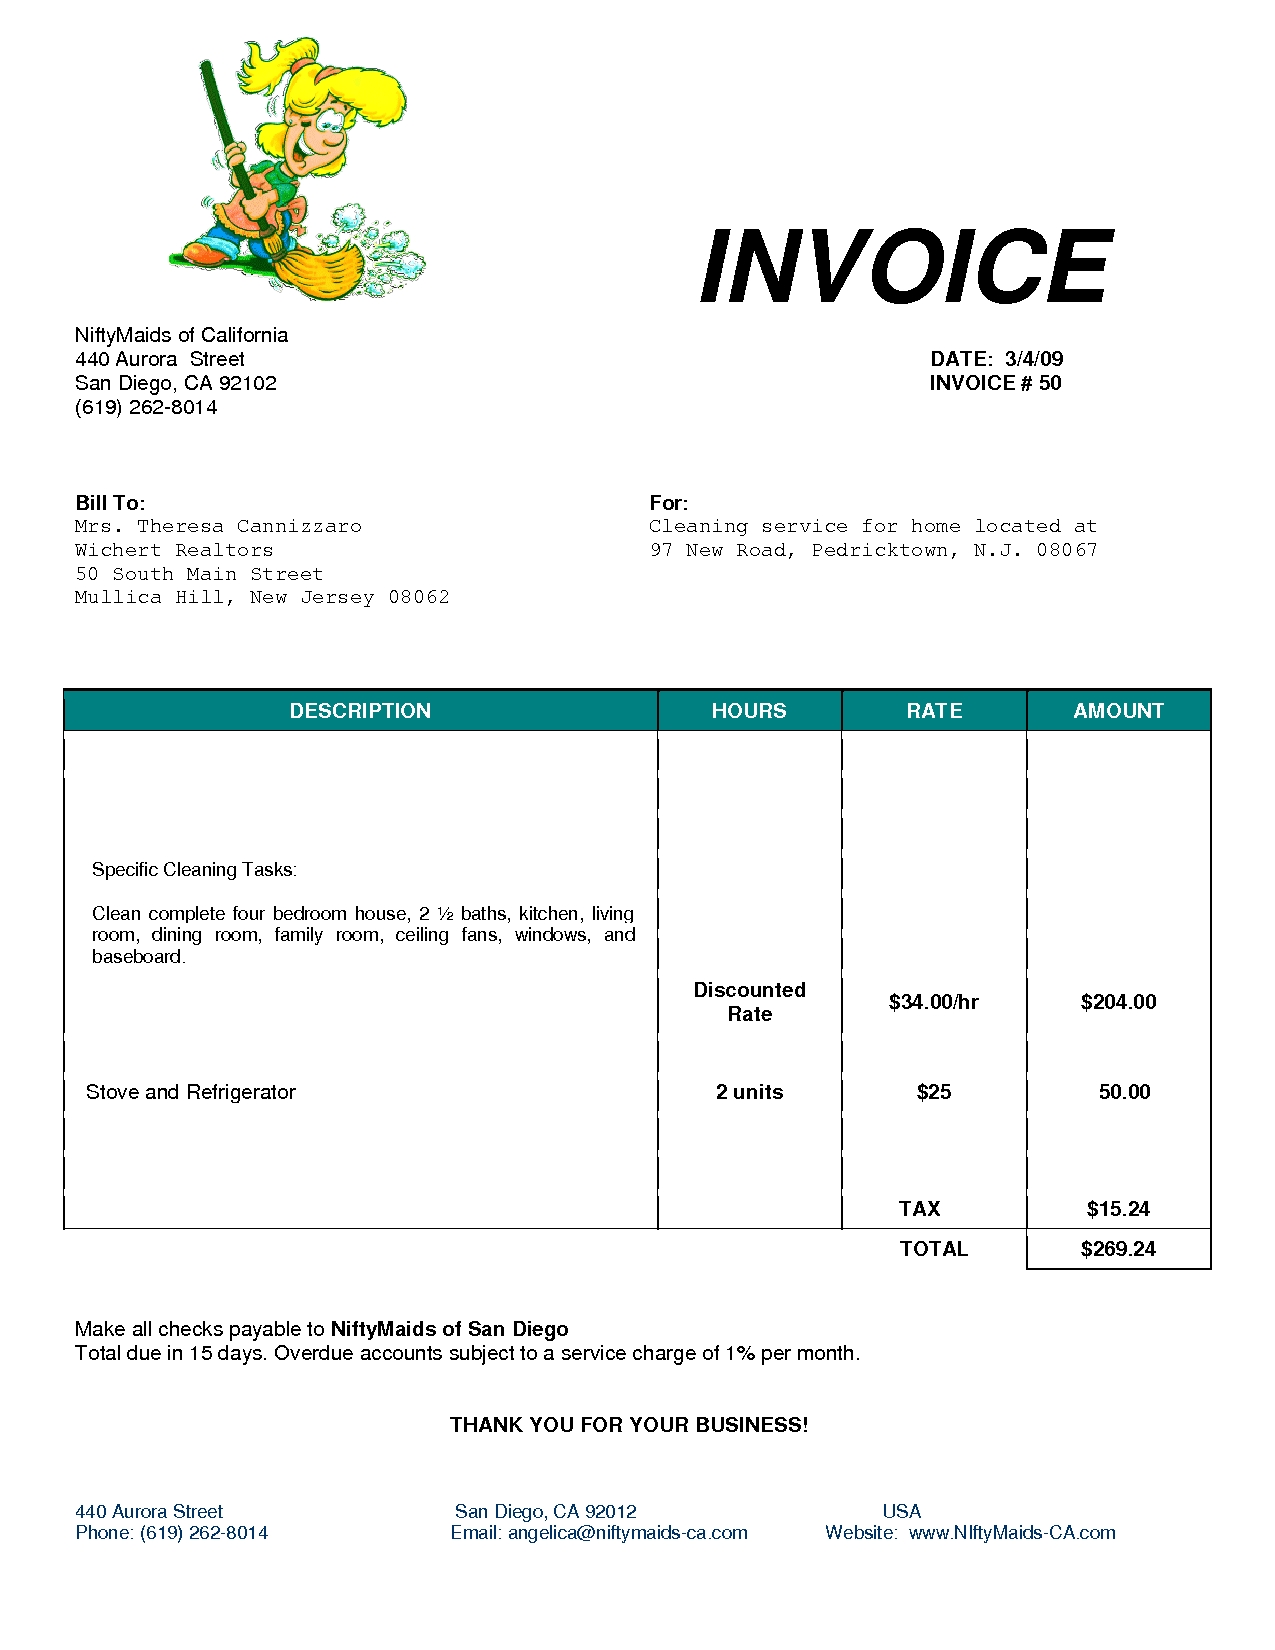 bhouseb bcleaningb bhouseb invoice free house cleaner invoice download